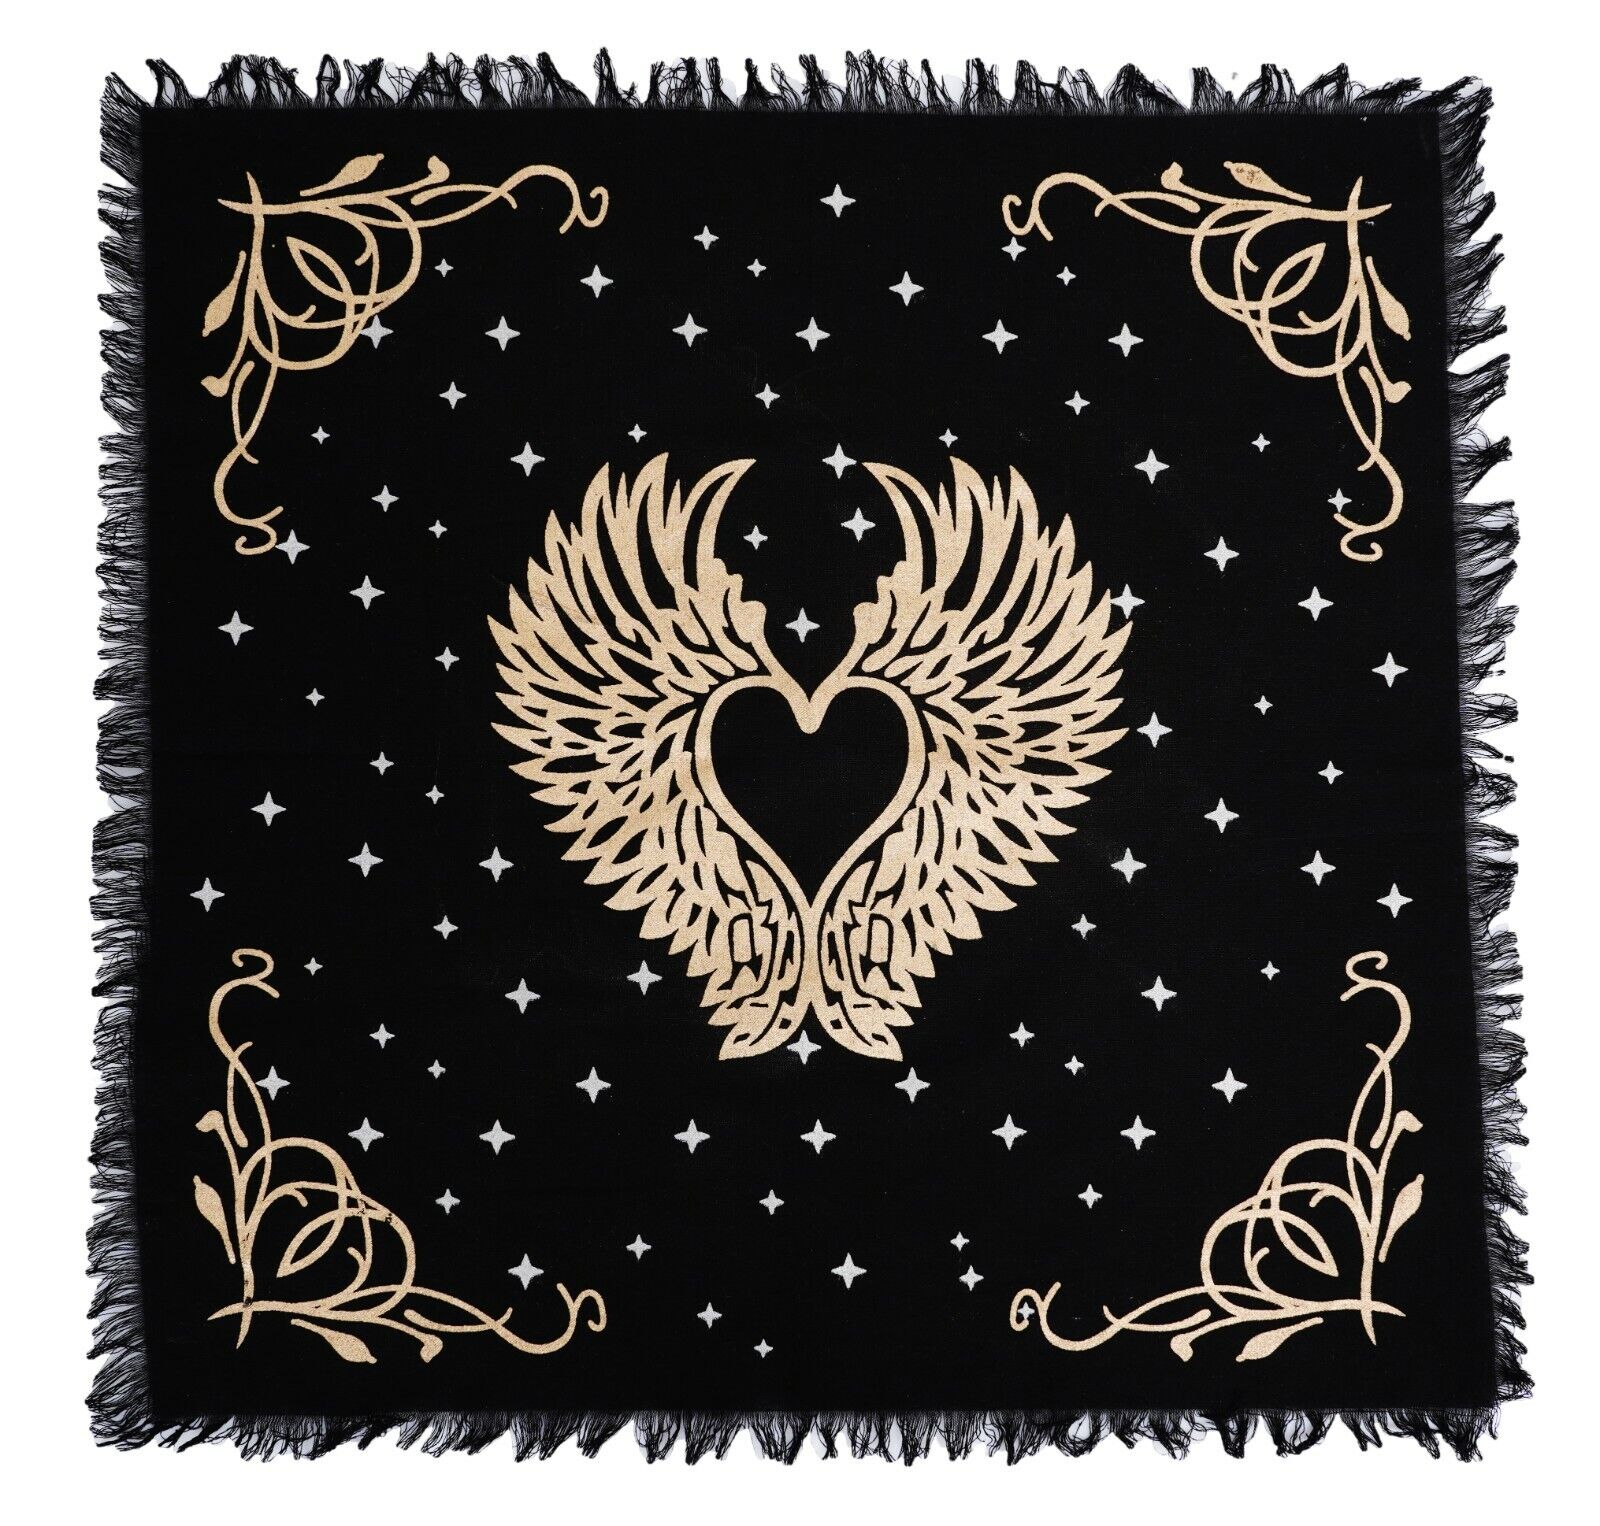 18 X 18 Inches Gold Silver Angel Wings Altar Duck Cloth Tarot Table Napkin/cover